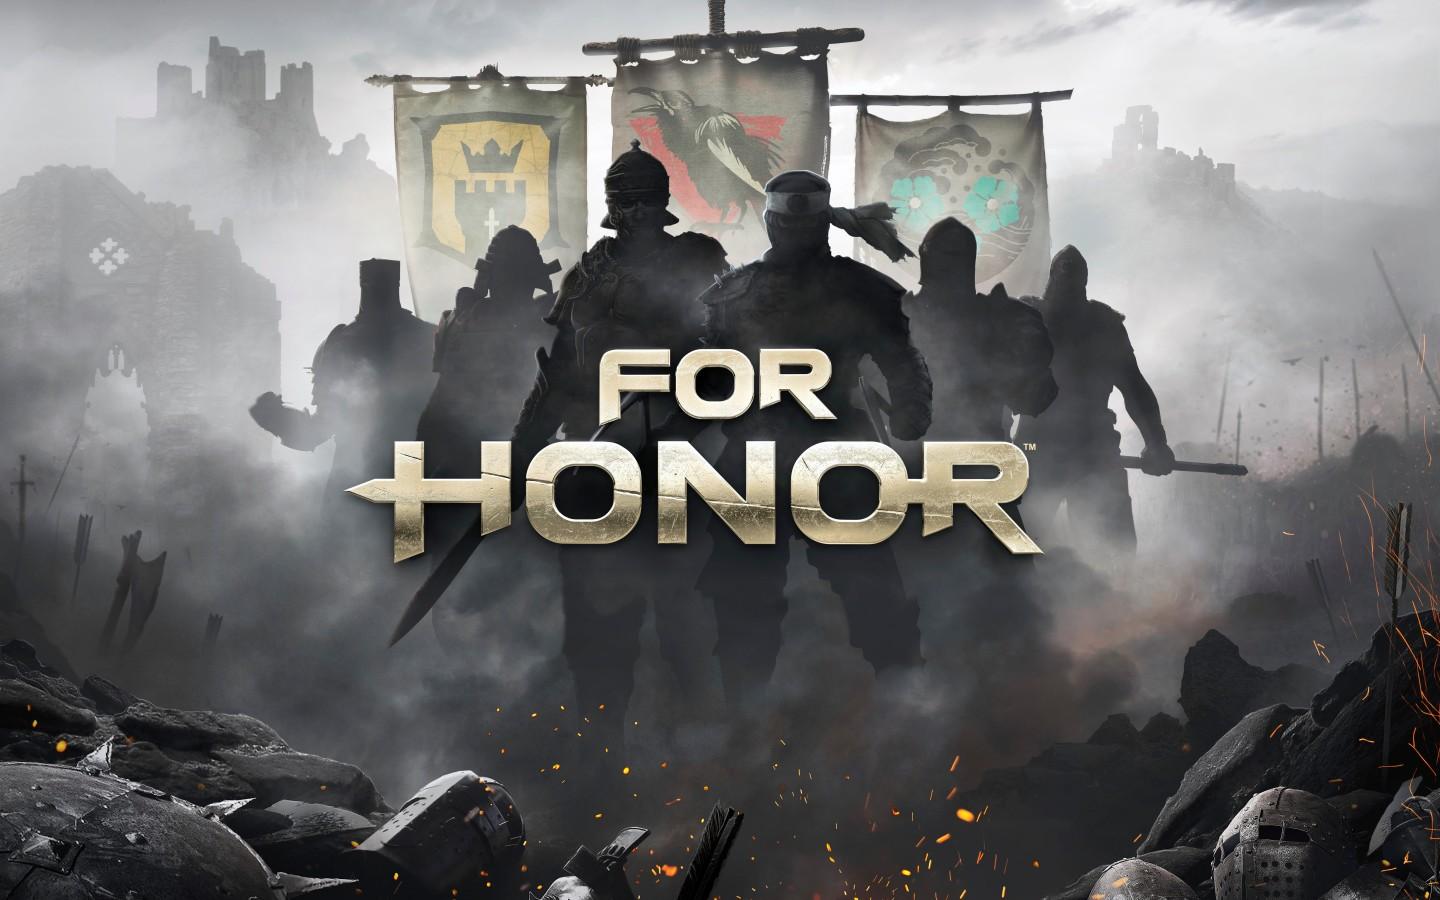 FOR HONOR game wallpaper